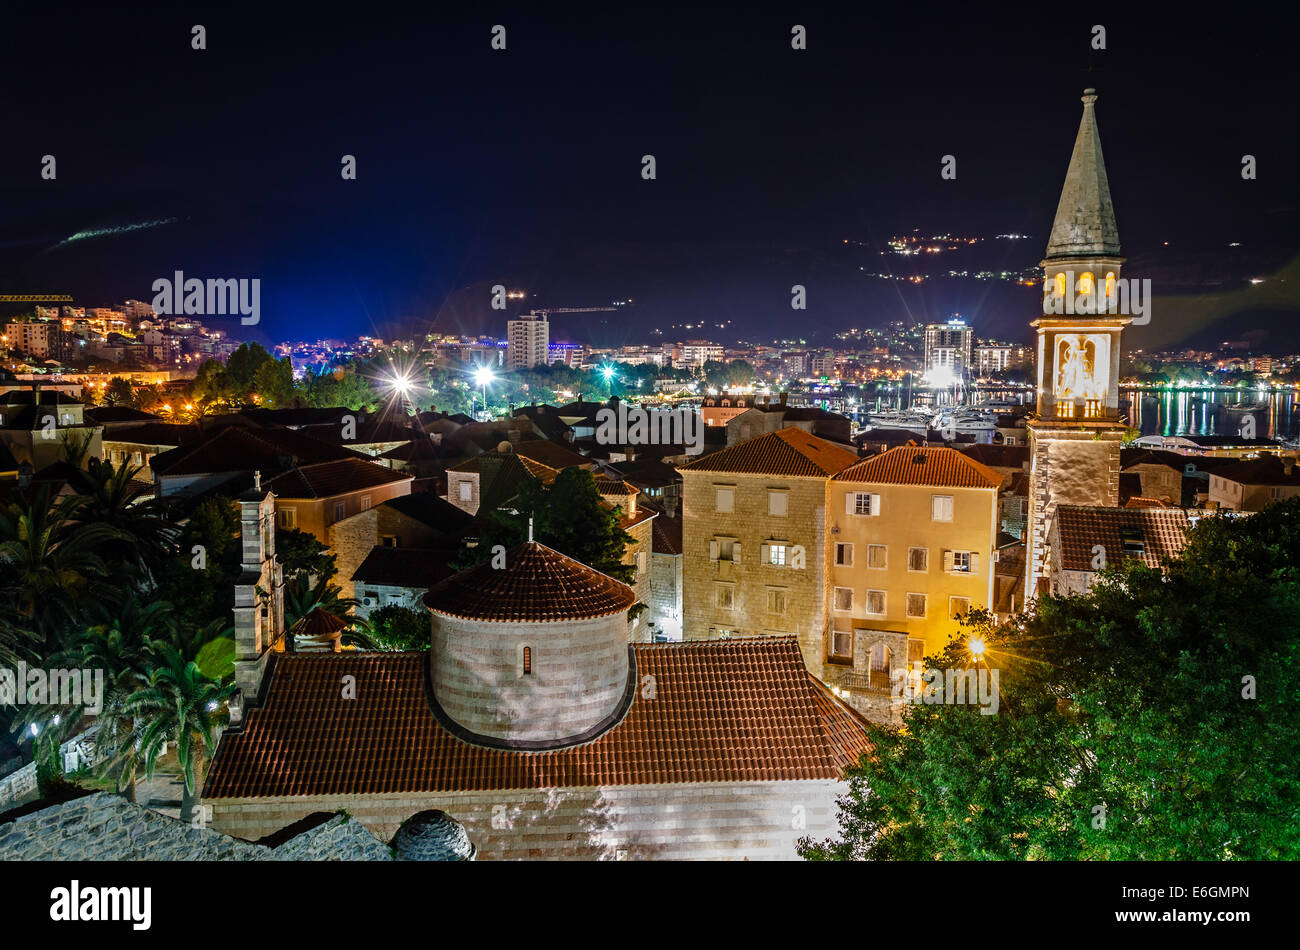 Old town of Budva at night. View from citadel. Stock Photo